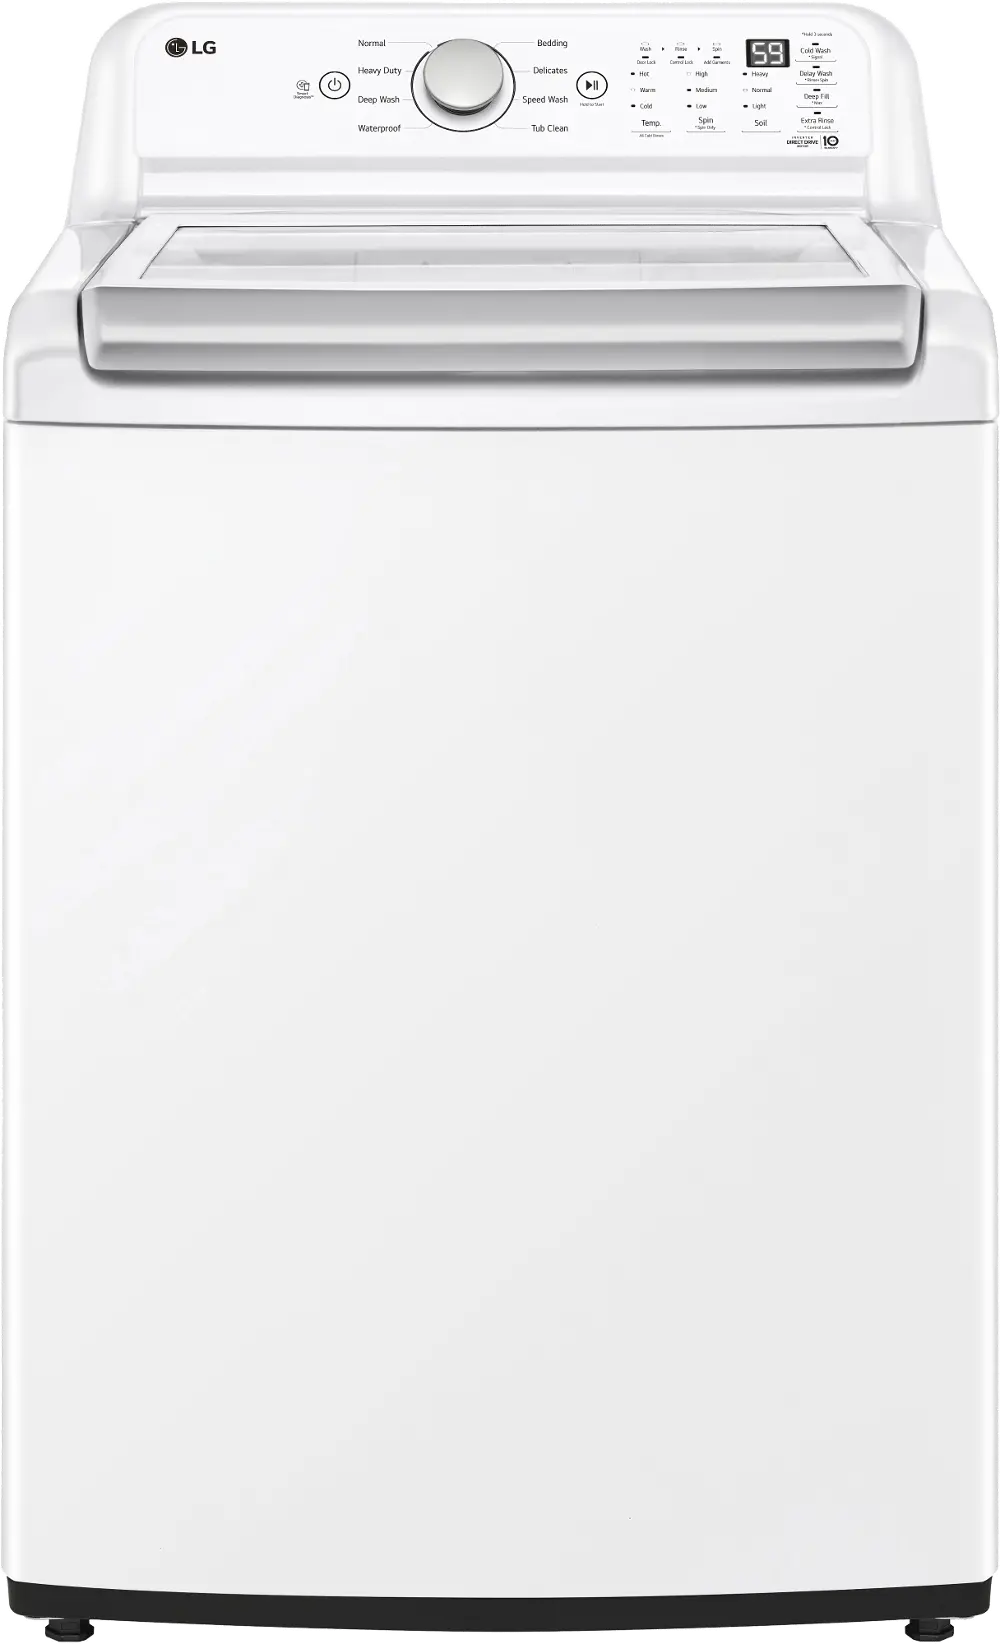 WT7155CW LG 4.8 cu ft Top Load Washer with Agitator - White, 7150W-1